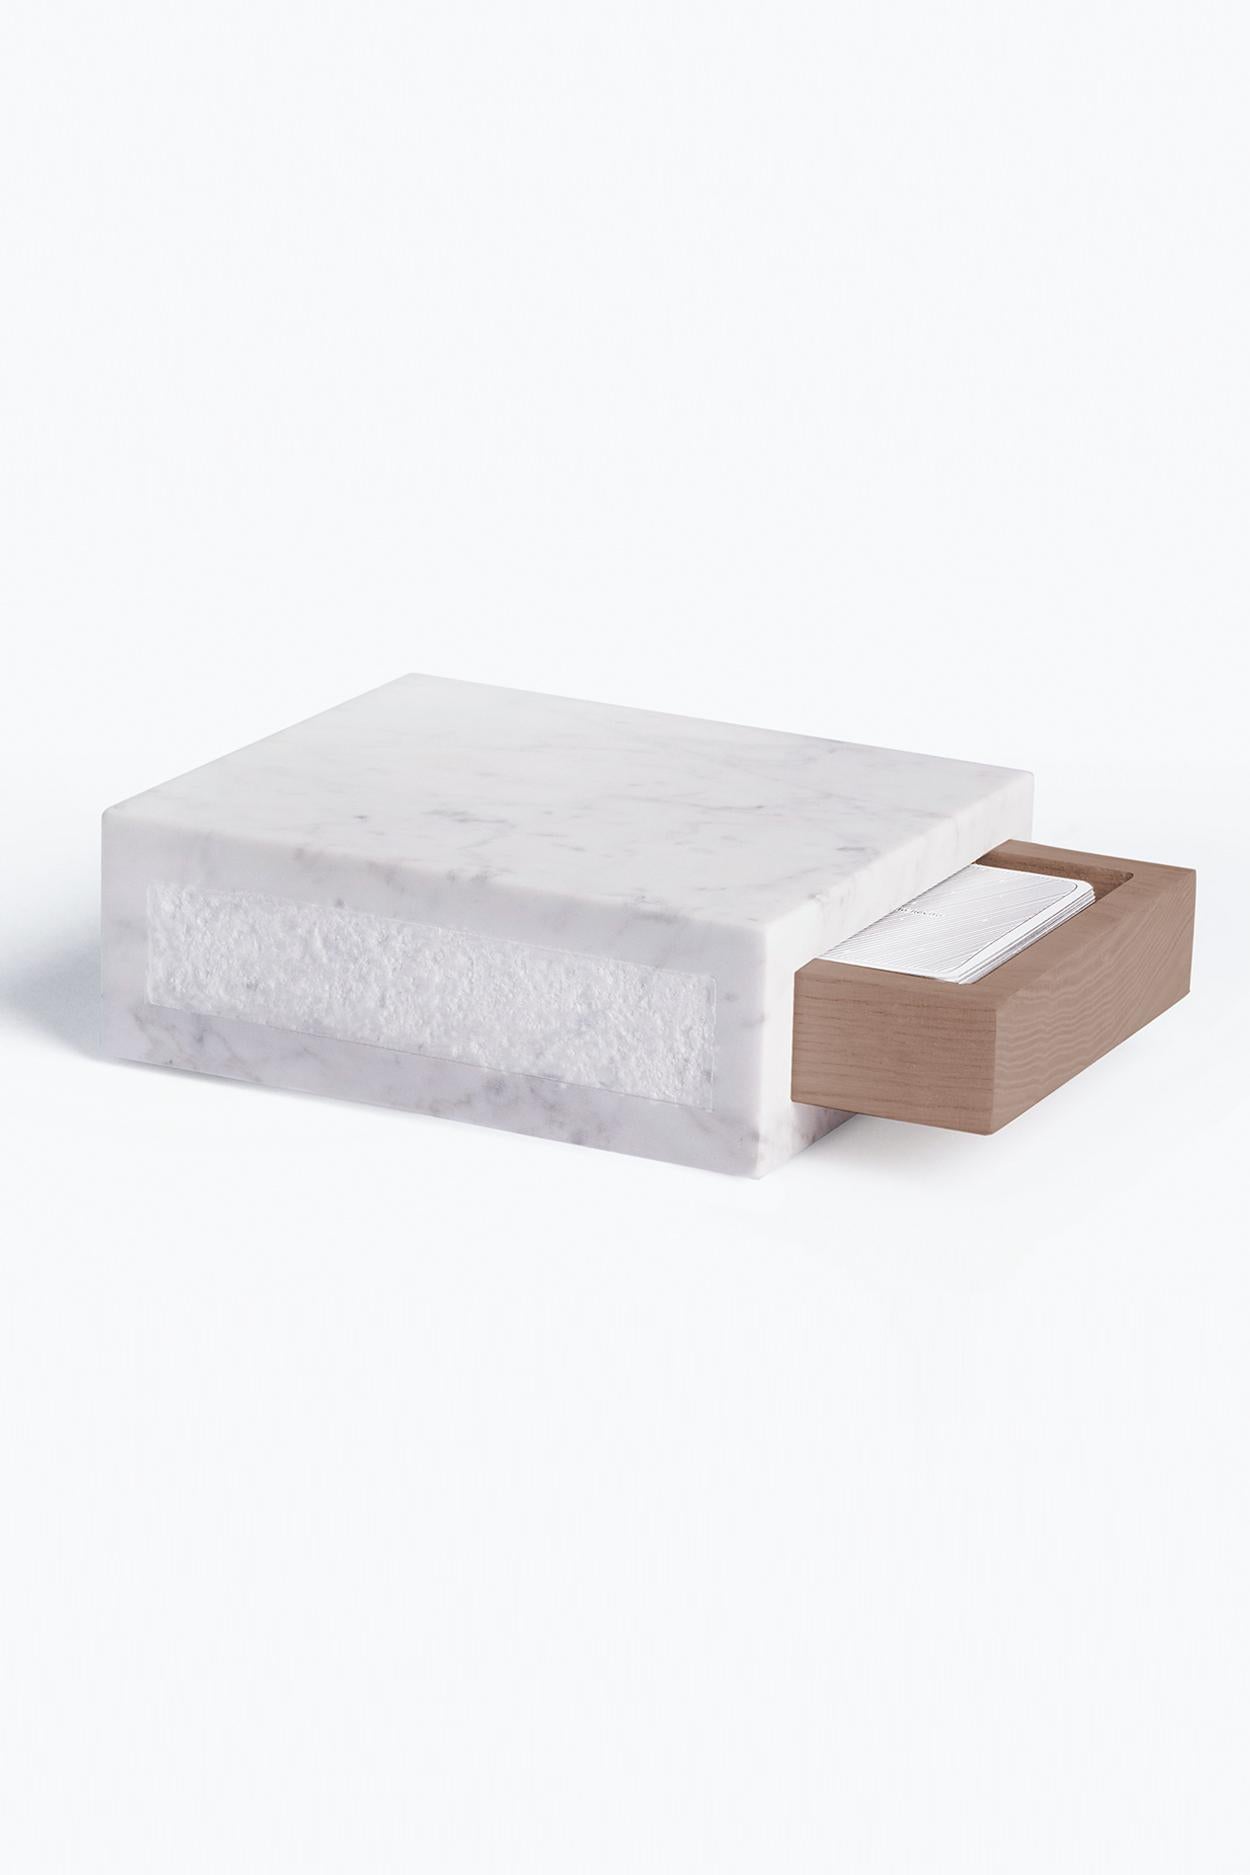 A reference to one of the most characteristic uses of marble and to the territory of origin of Studio Lievito, this package recalls the box where the lard is stored during its seasoning. Fashioned of white Carrara marble with a sliding mahogany